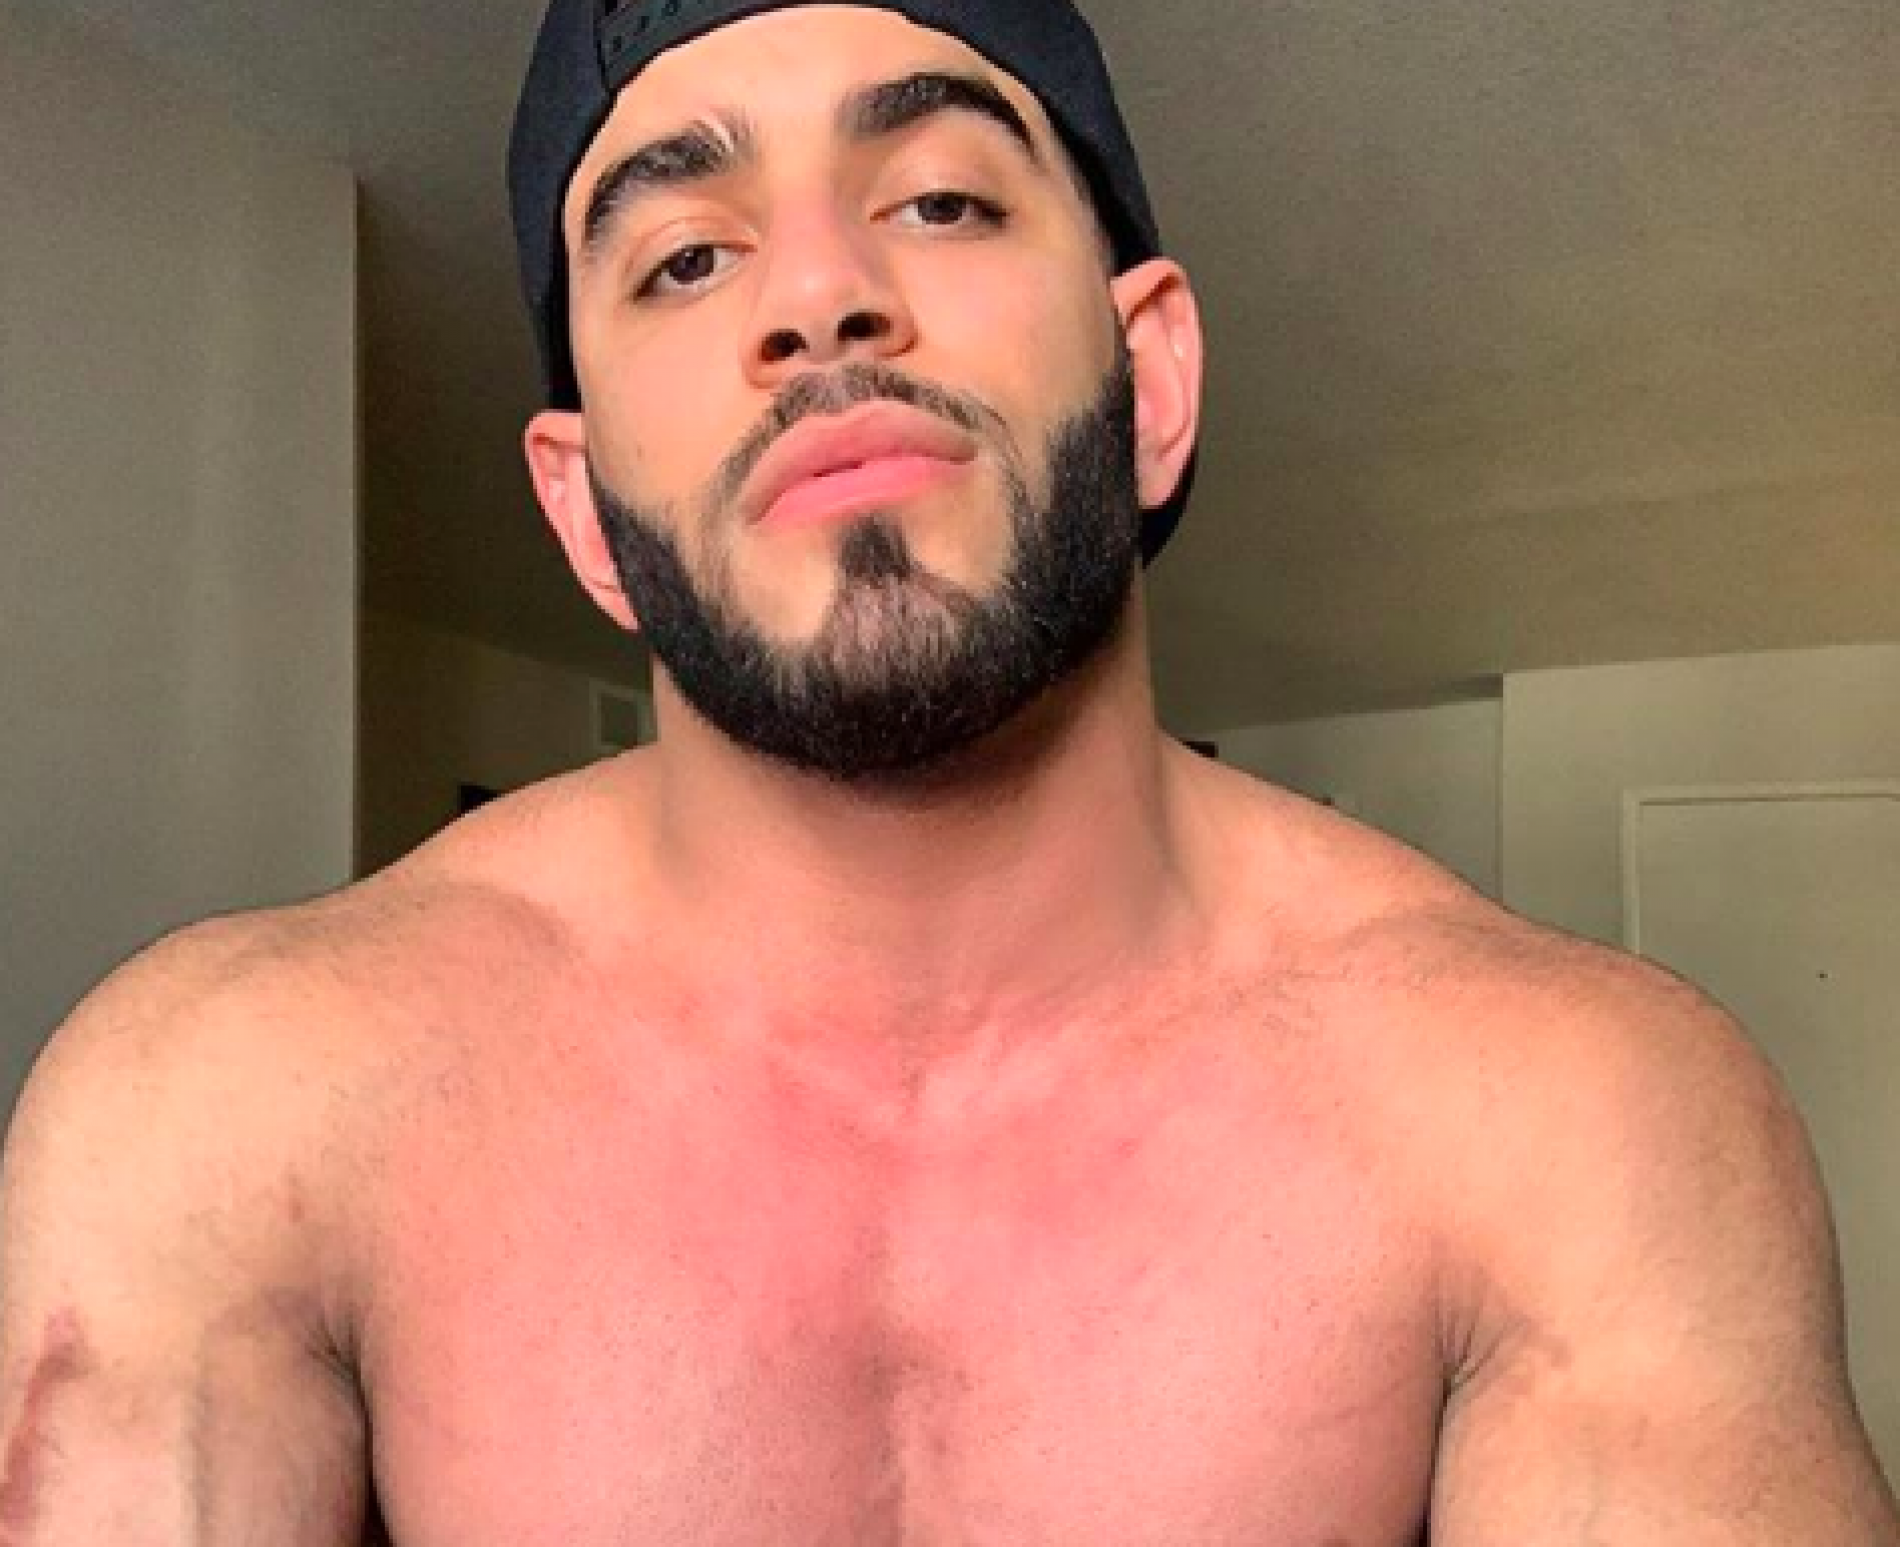 This instagram model says he feels “disrespected” when followers post comments on his “perfect body”